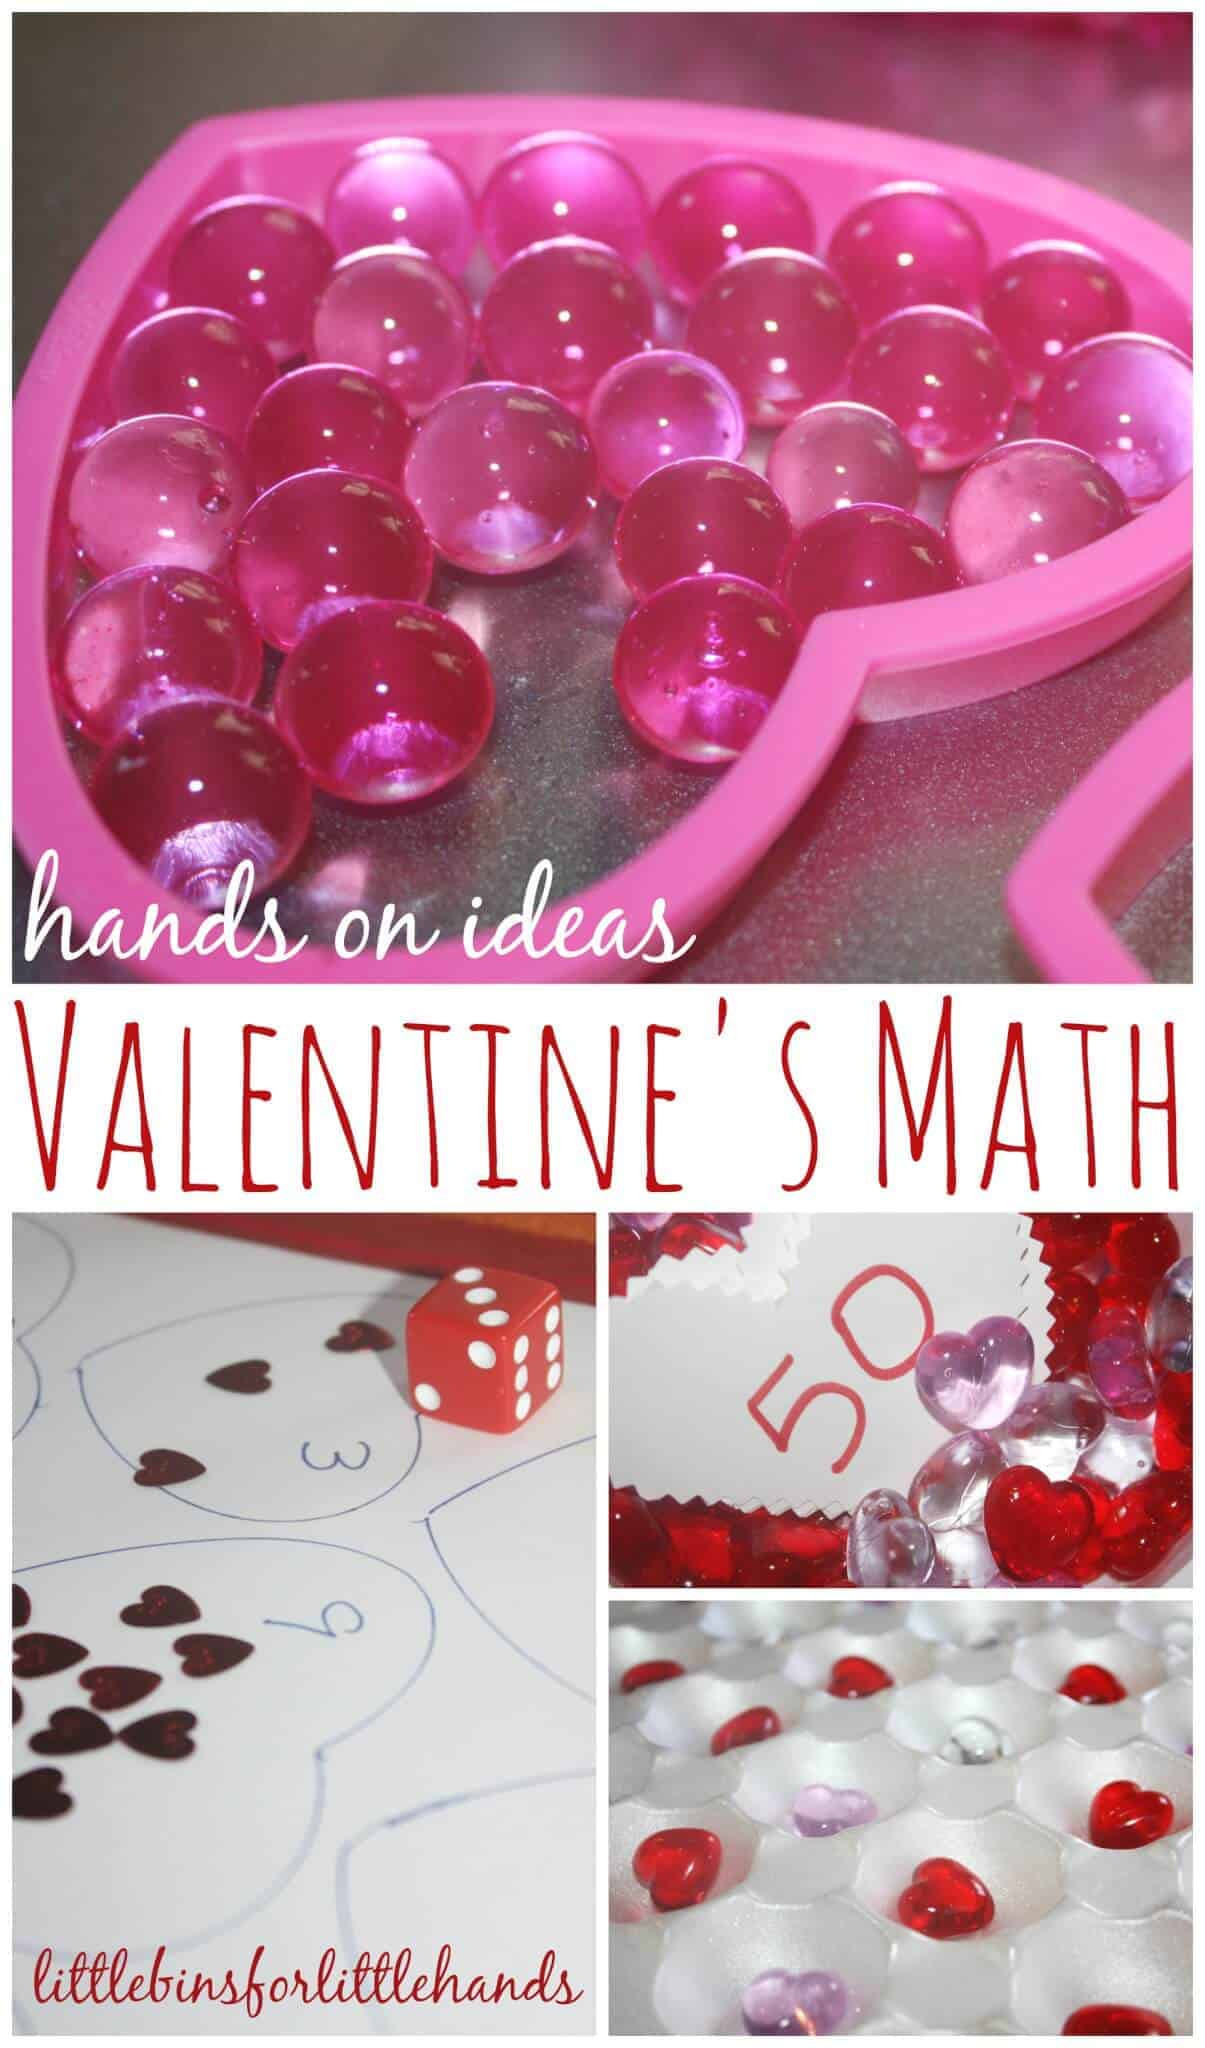 Preschool Valentine Gift Ideas
 Valentines Preschool Activities for Early Learning